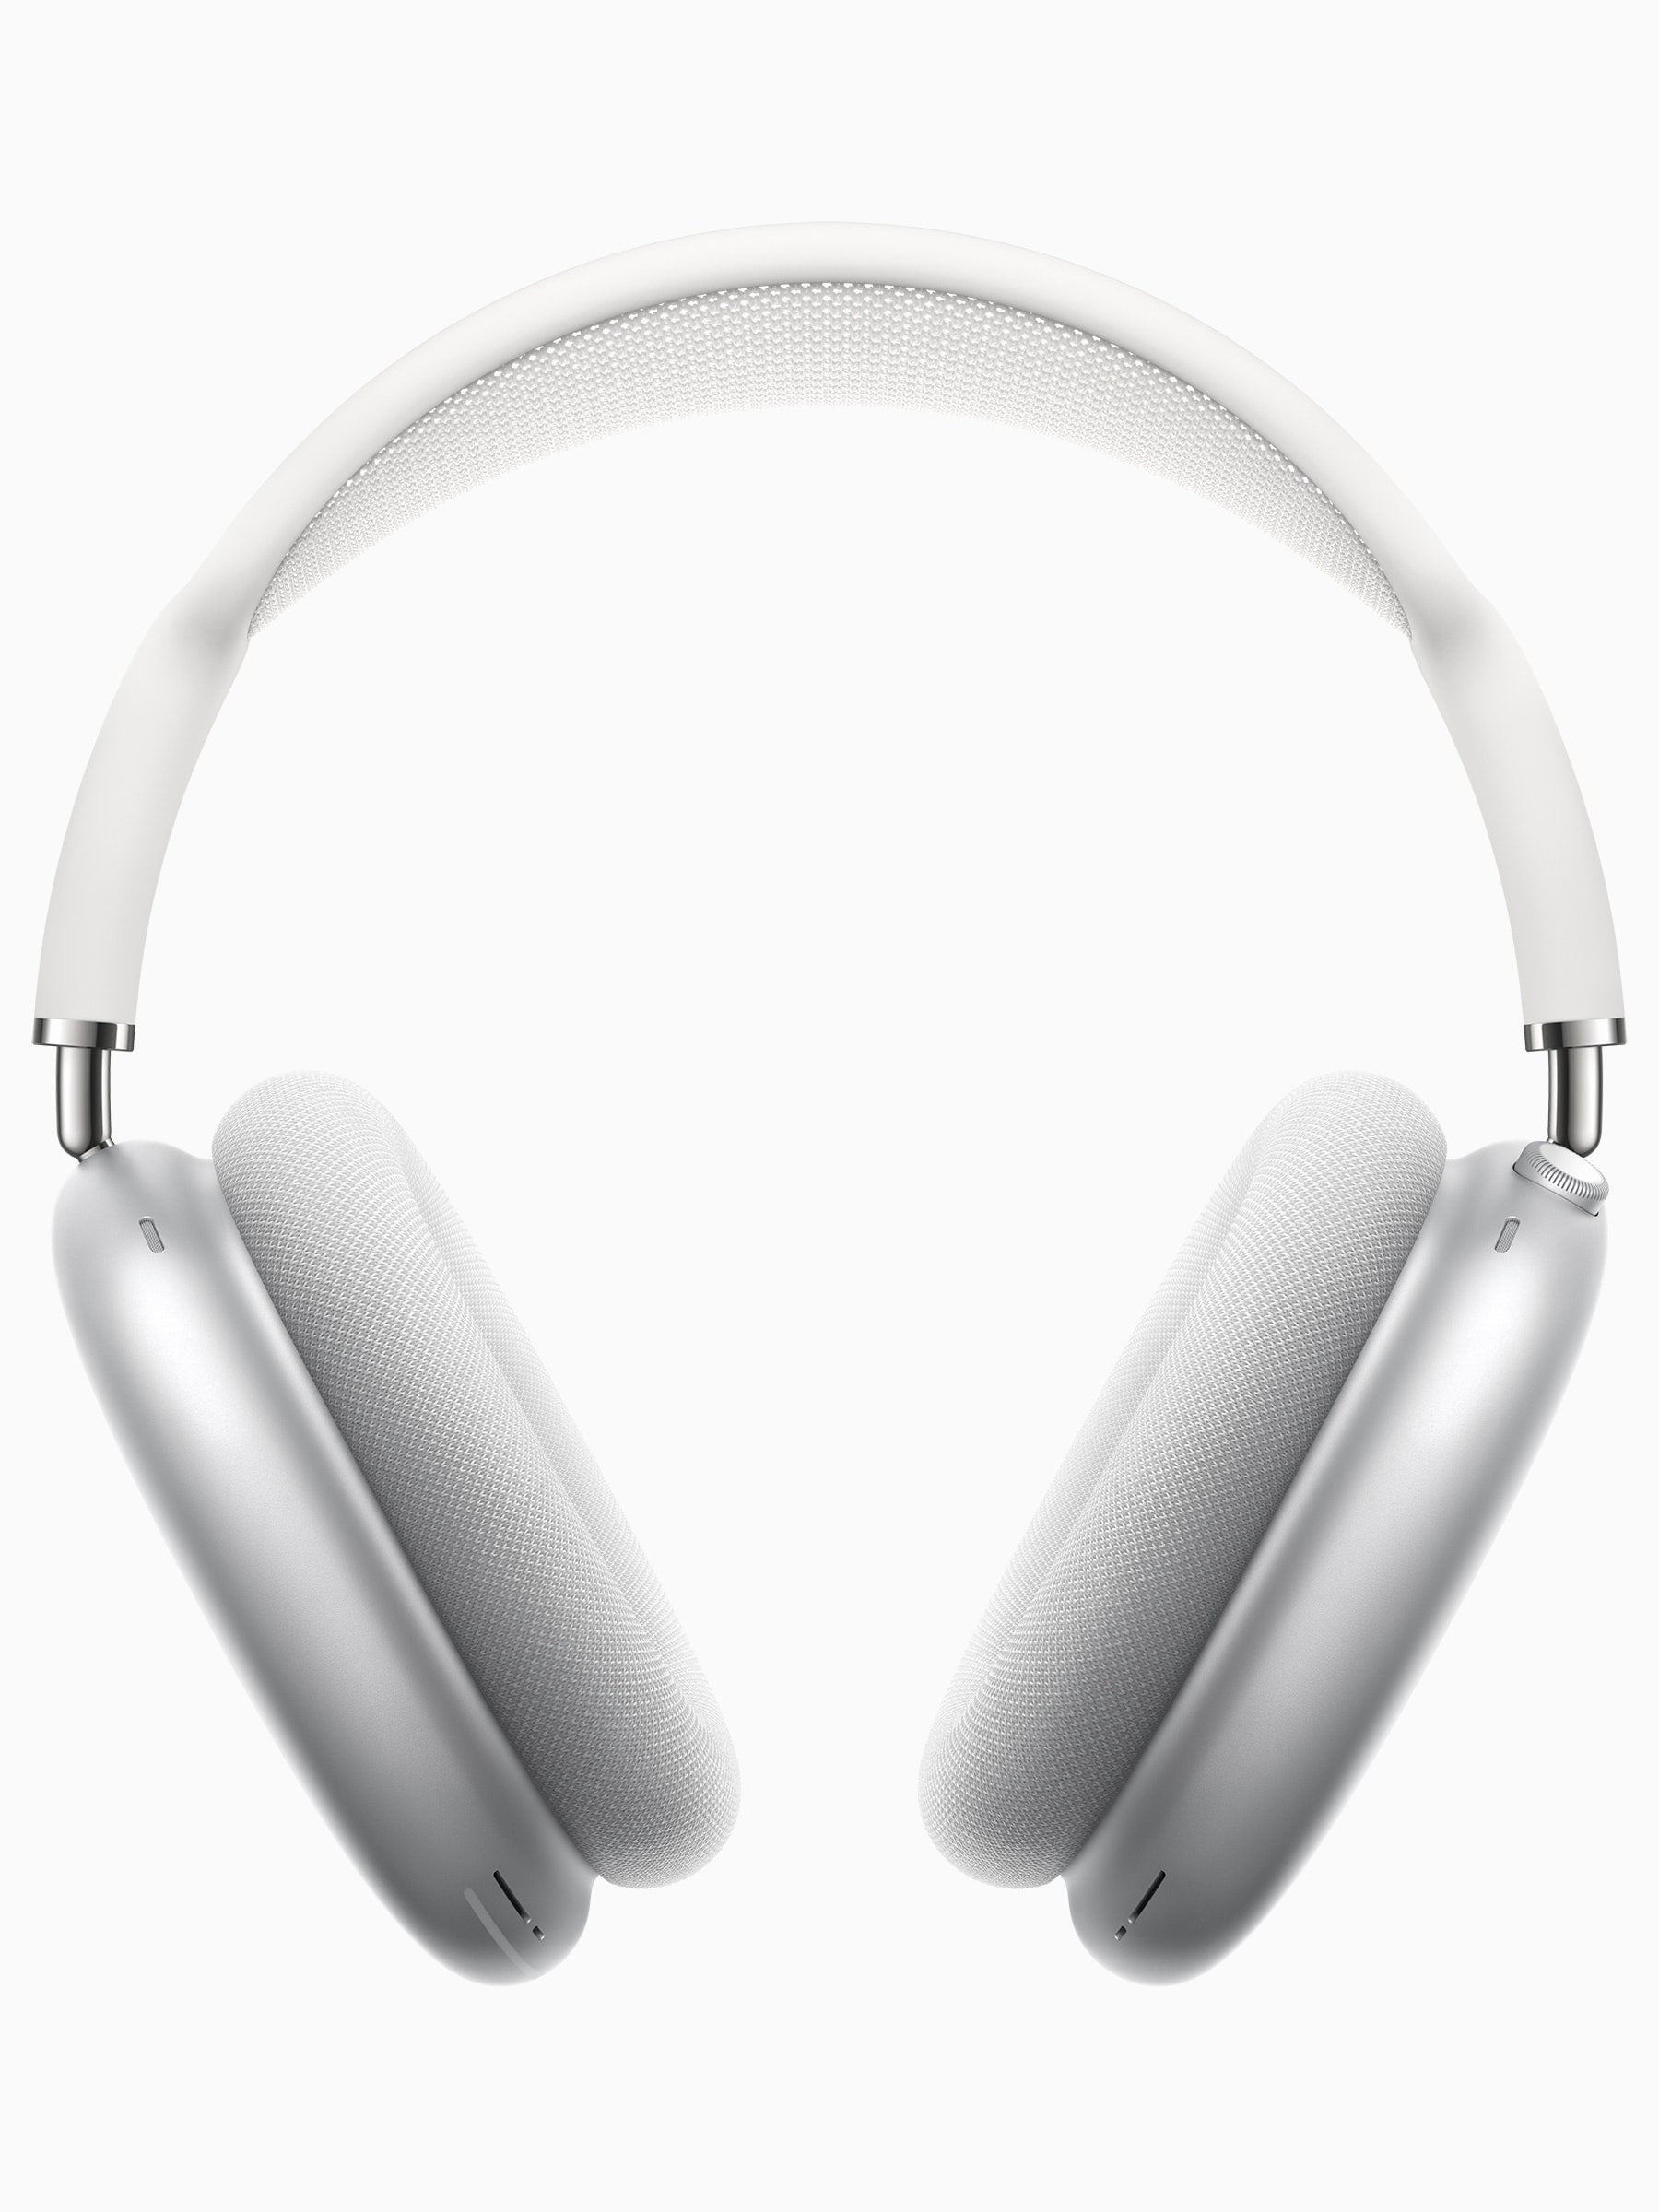 this is what Apple’s new headset will look like